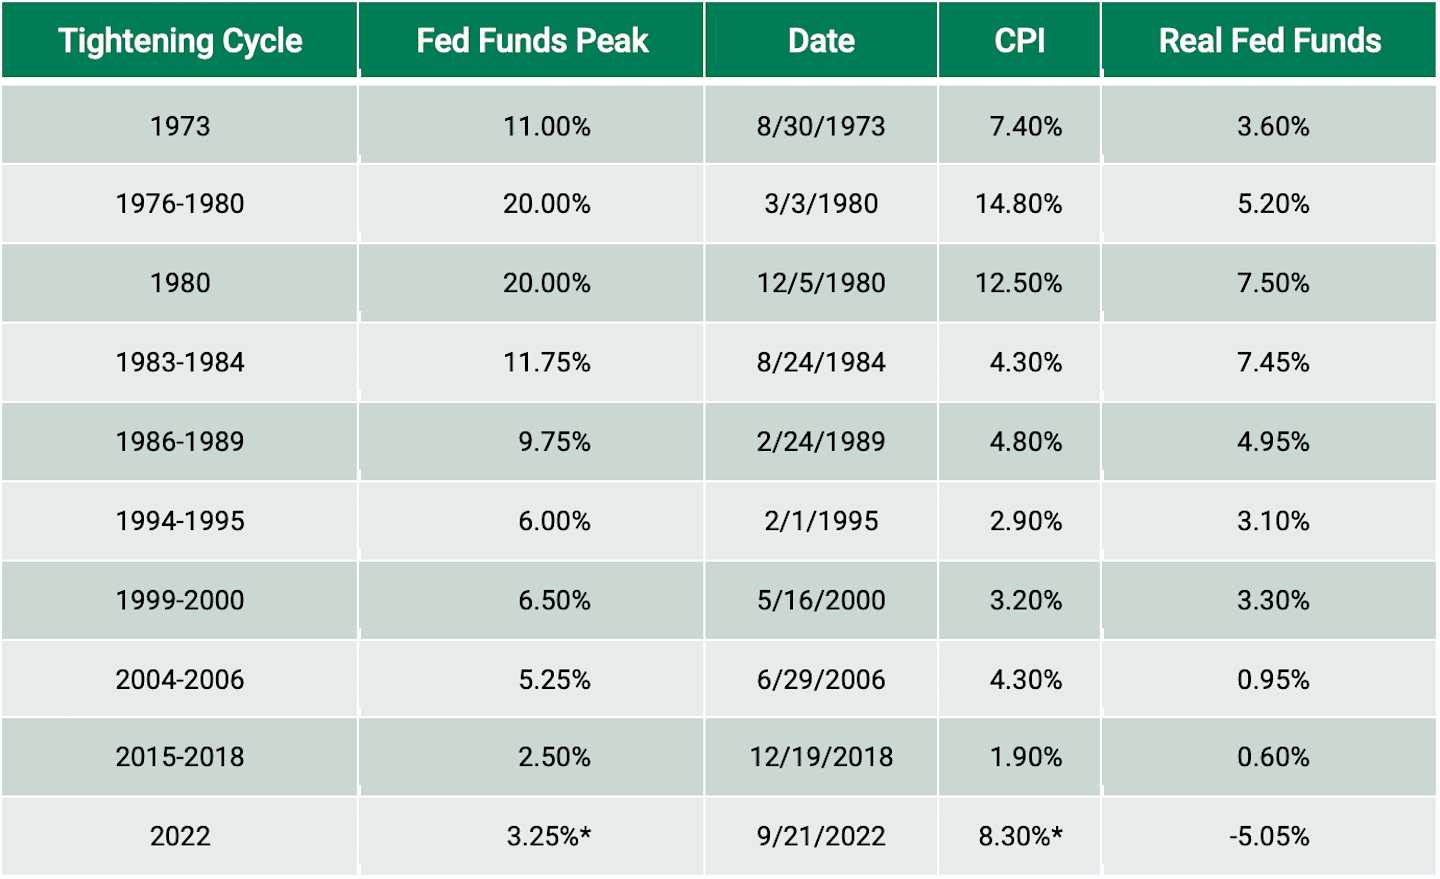 Fed’s Target Rate Has Exceeded CPI